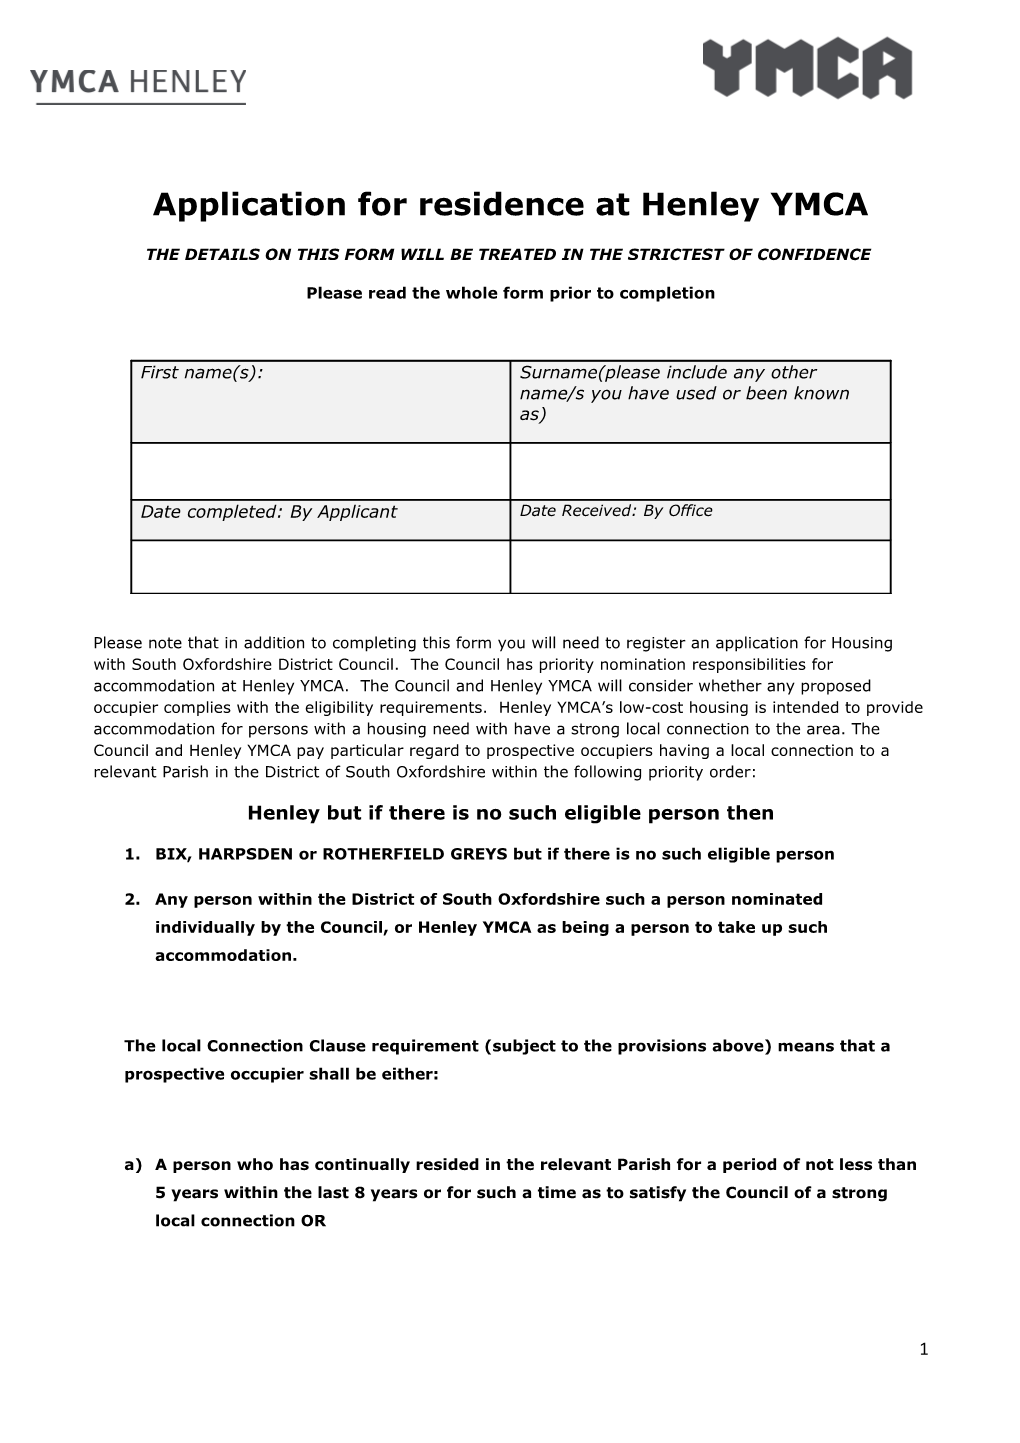 Application for Residence at Henley YMCA